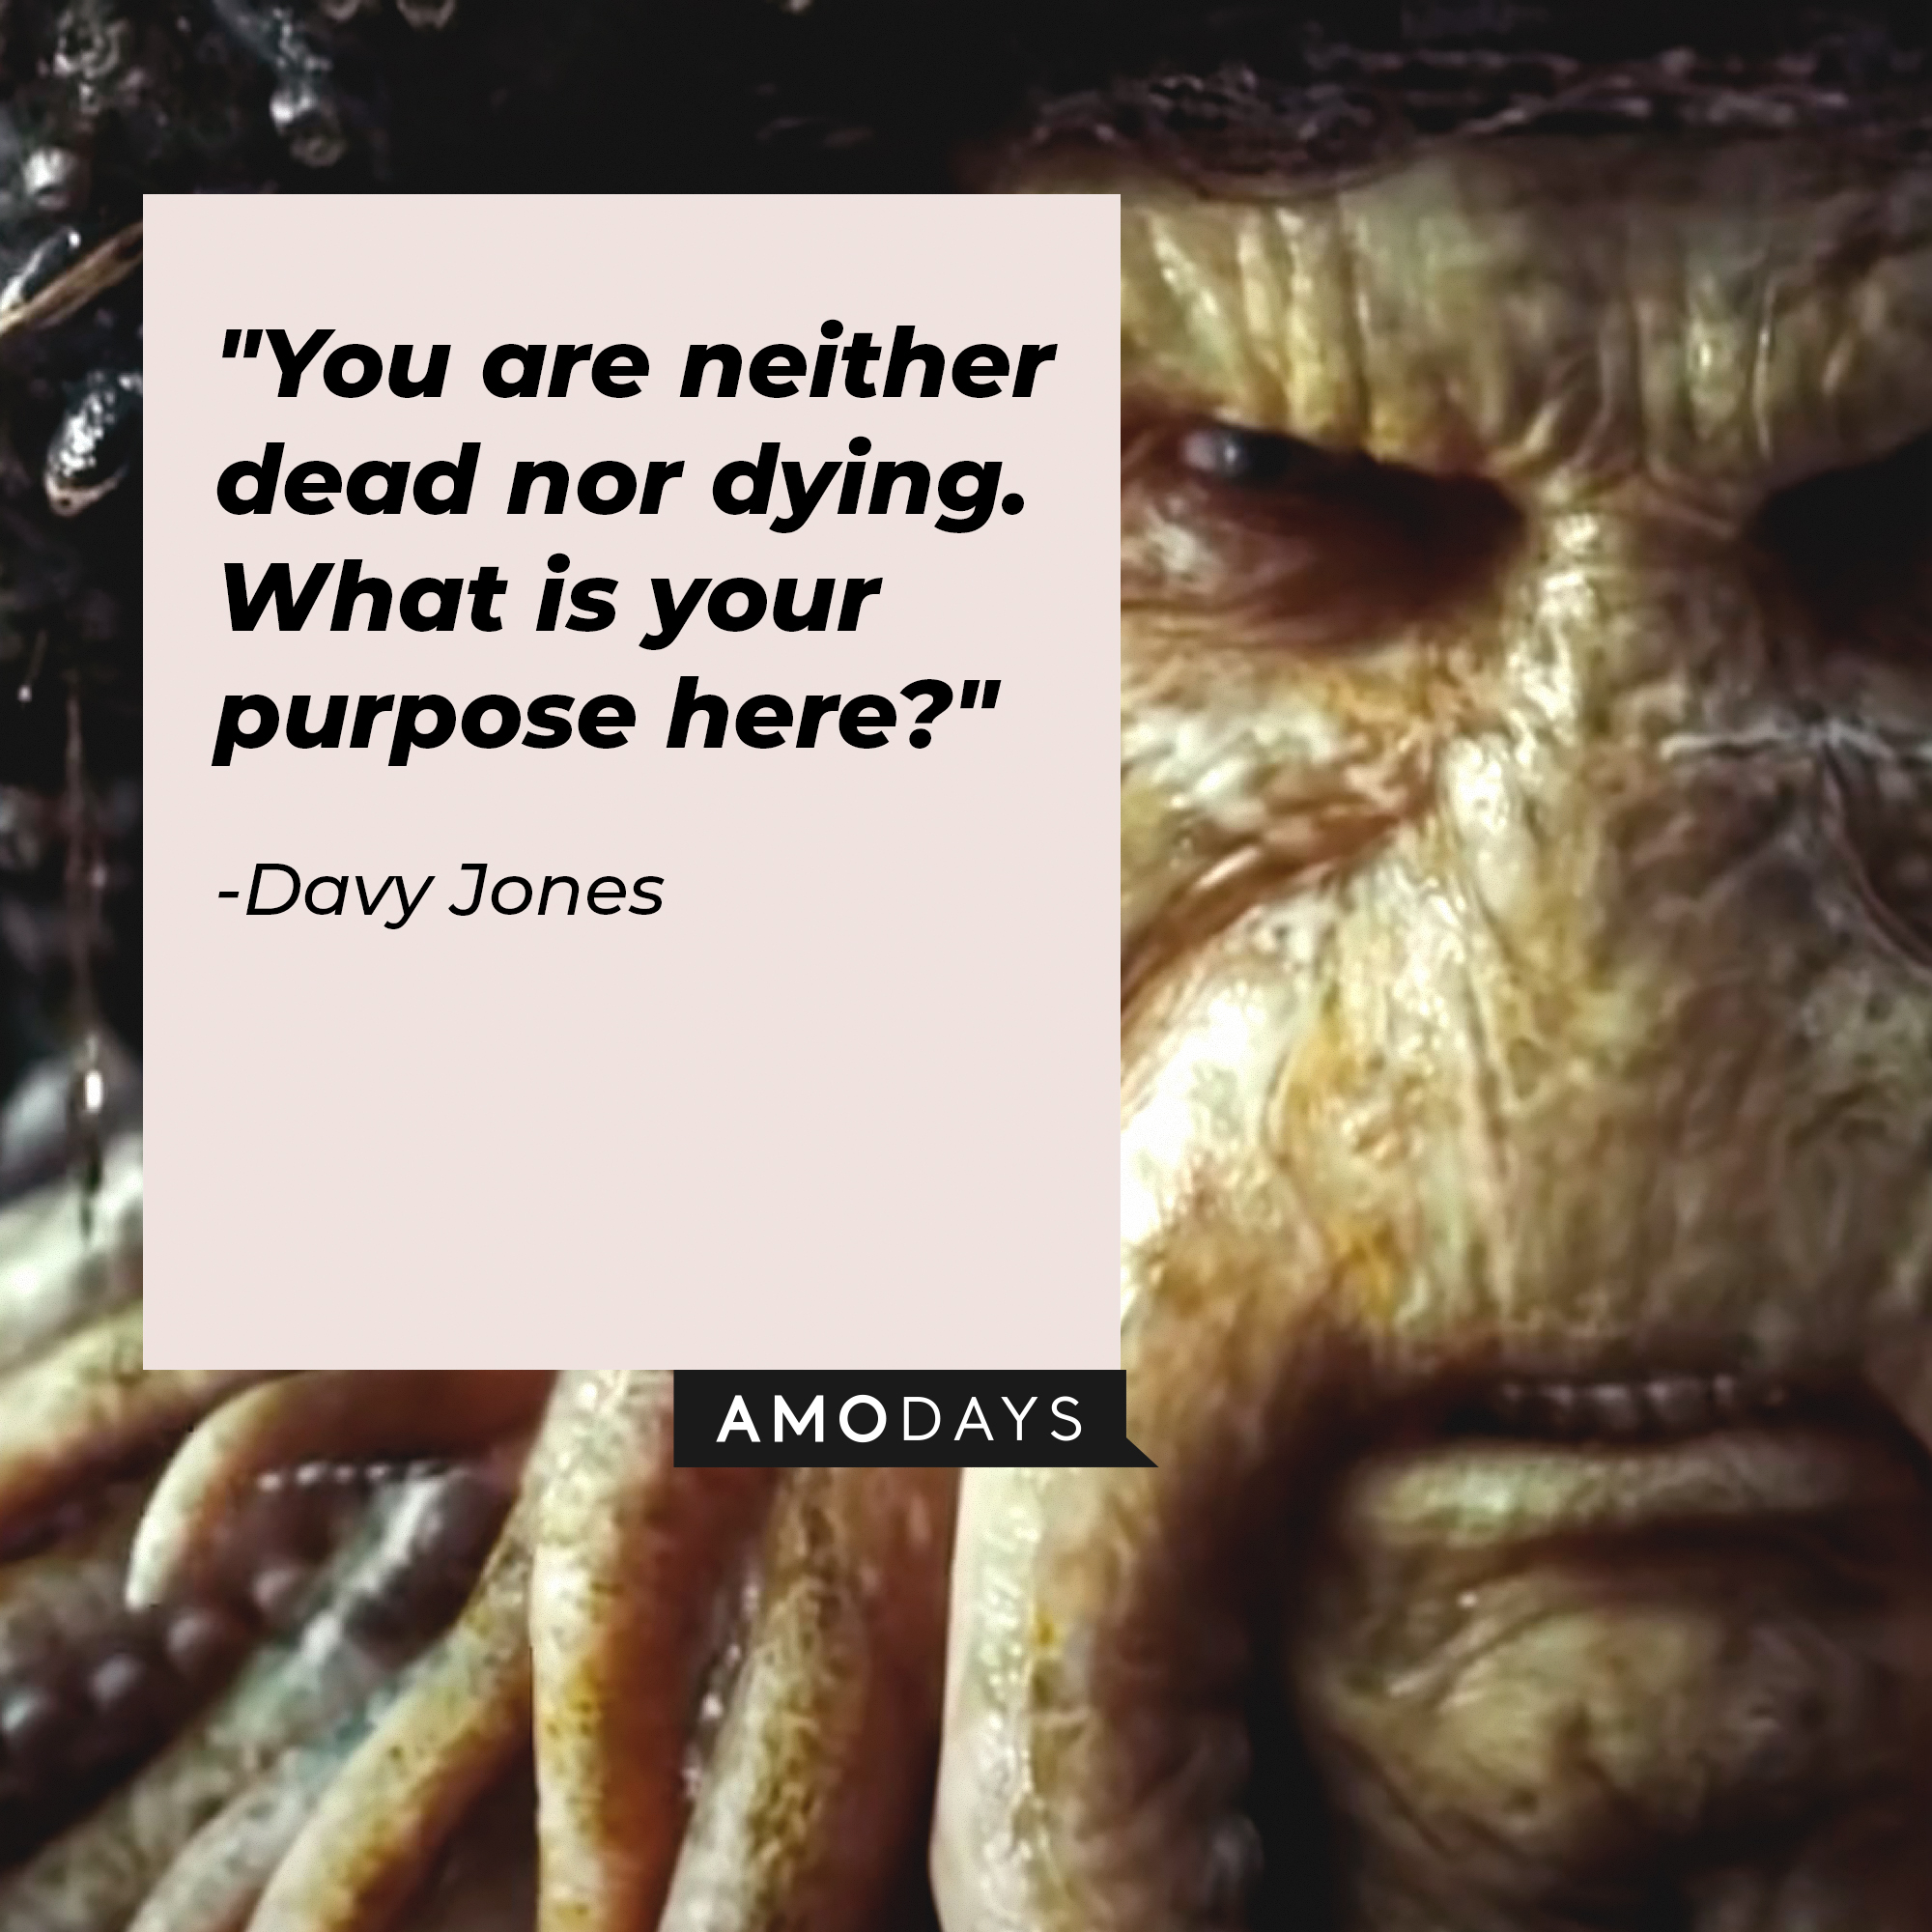 Davy Jones's quotes: "You are neither dead nor dying. What is your purpose here?" | Image: AmoDays